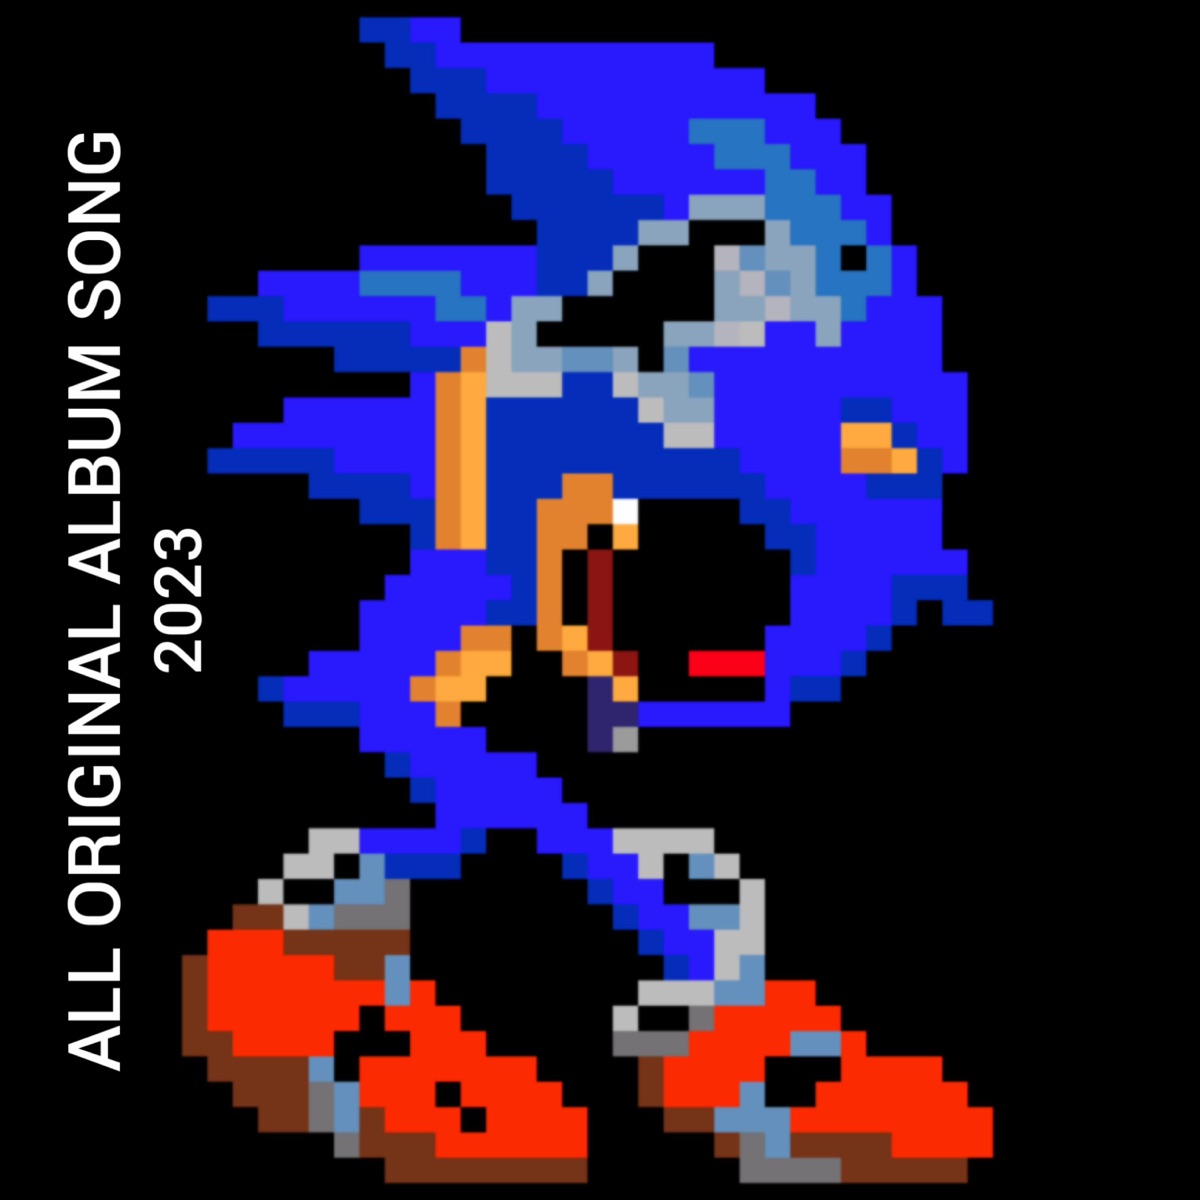 ‎Sonic.Exe Game Play Original Soundtrack - Album by Create Music Produtions  - Apple Music